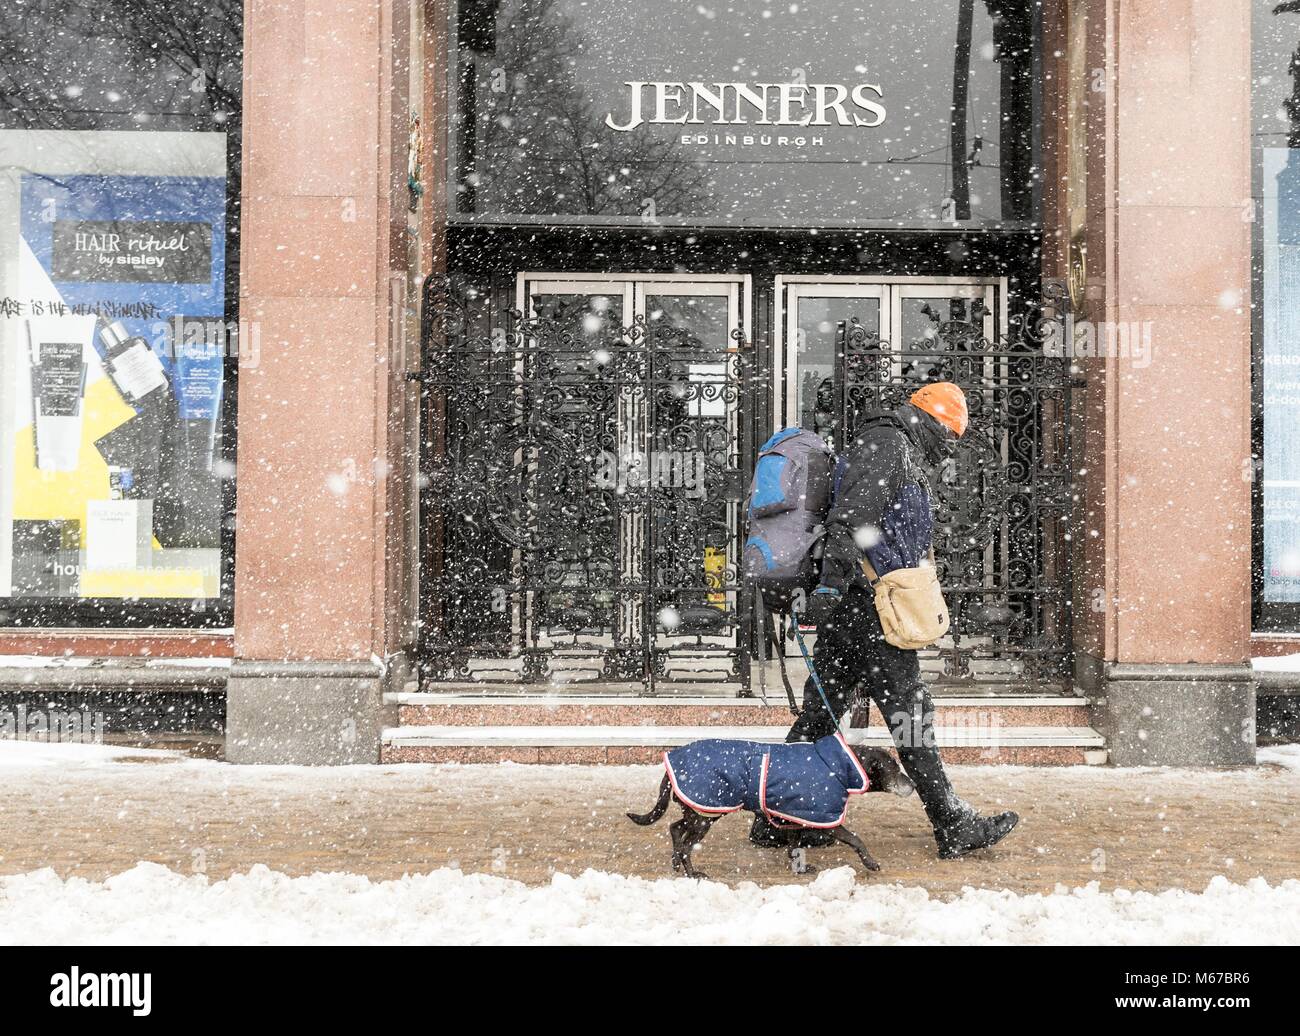 Edinburgh, Scotland, UK. 1st March, 2018. The Beast from the East, Storm Emma hit Edinburgh overnight and has left transport links decimated and many of the shops on the famous Princes Street closed for the day.  Pictured:  The department store Jenners was unable to open due to the bad weather Credit: Rich Dyson/Alamy Live News Stock Photo